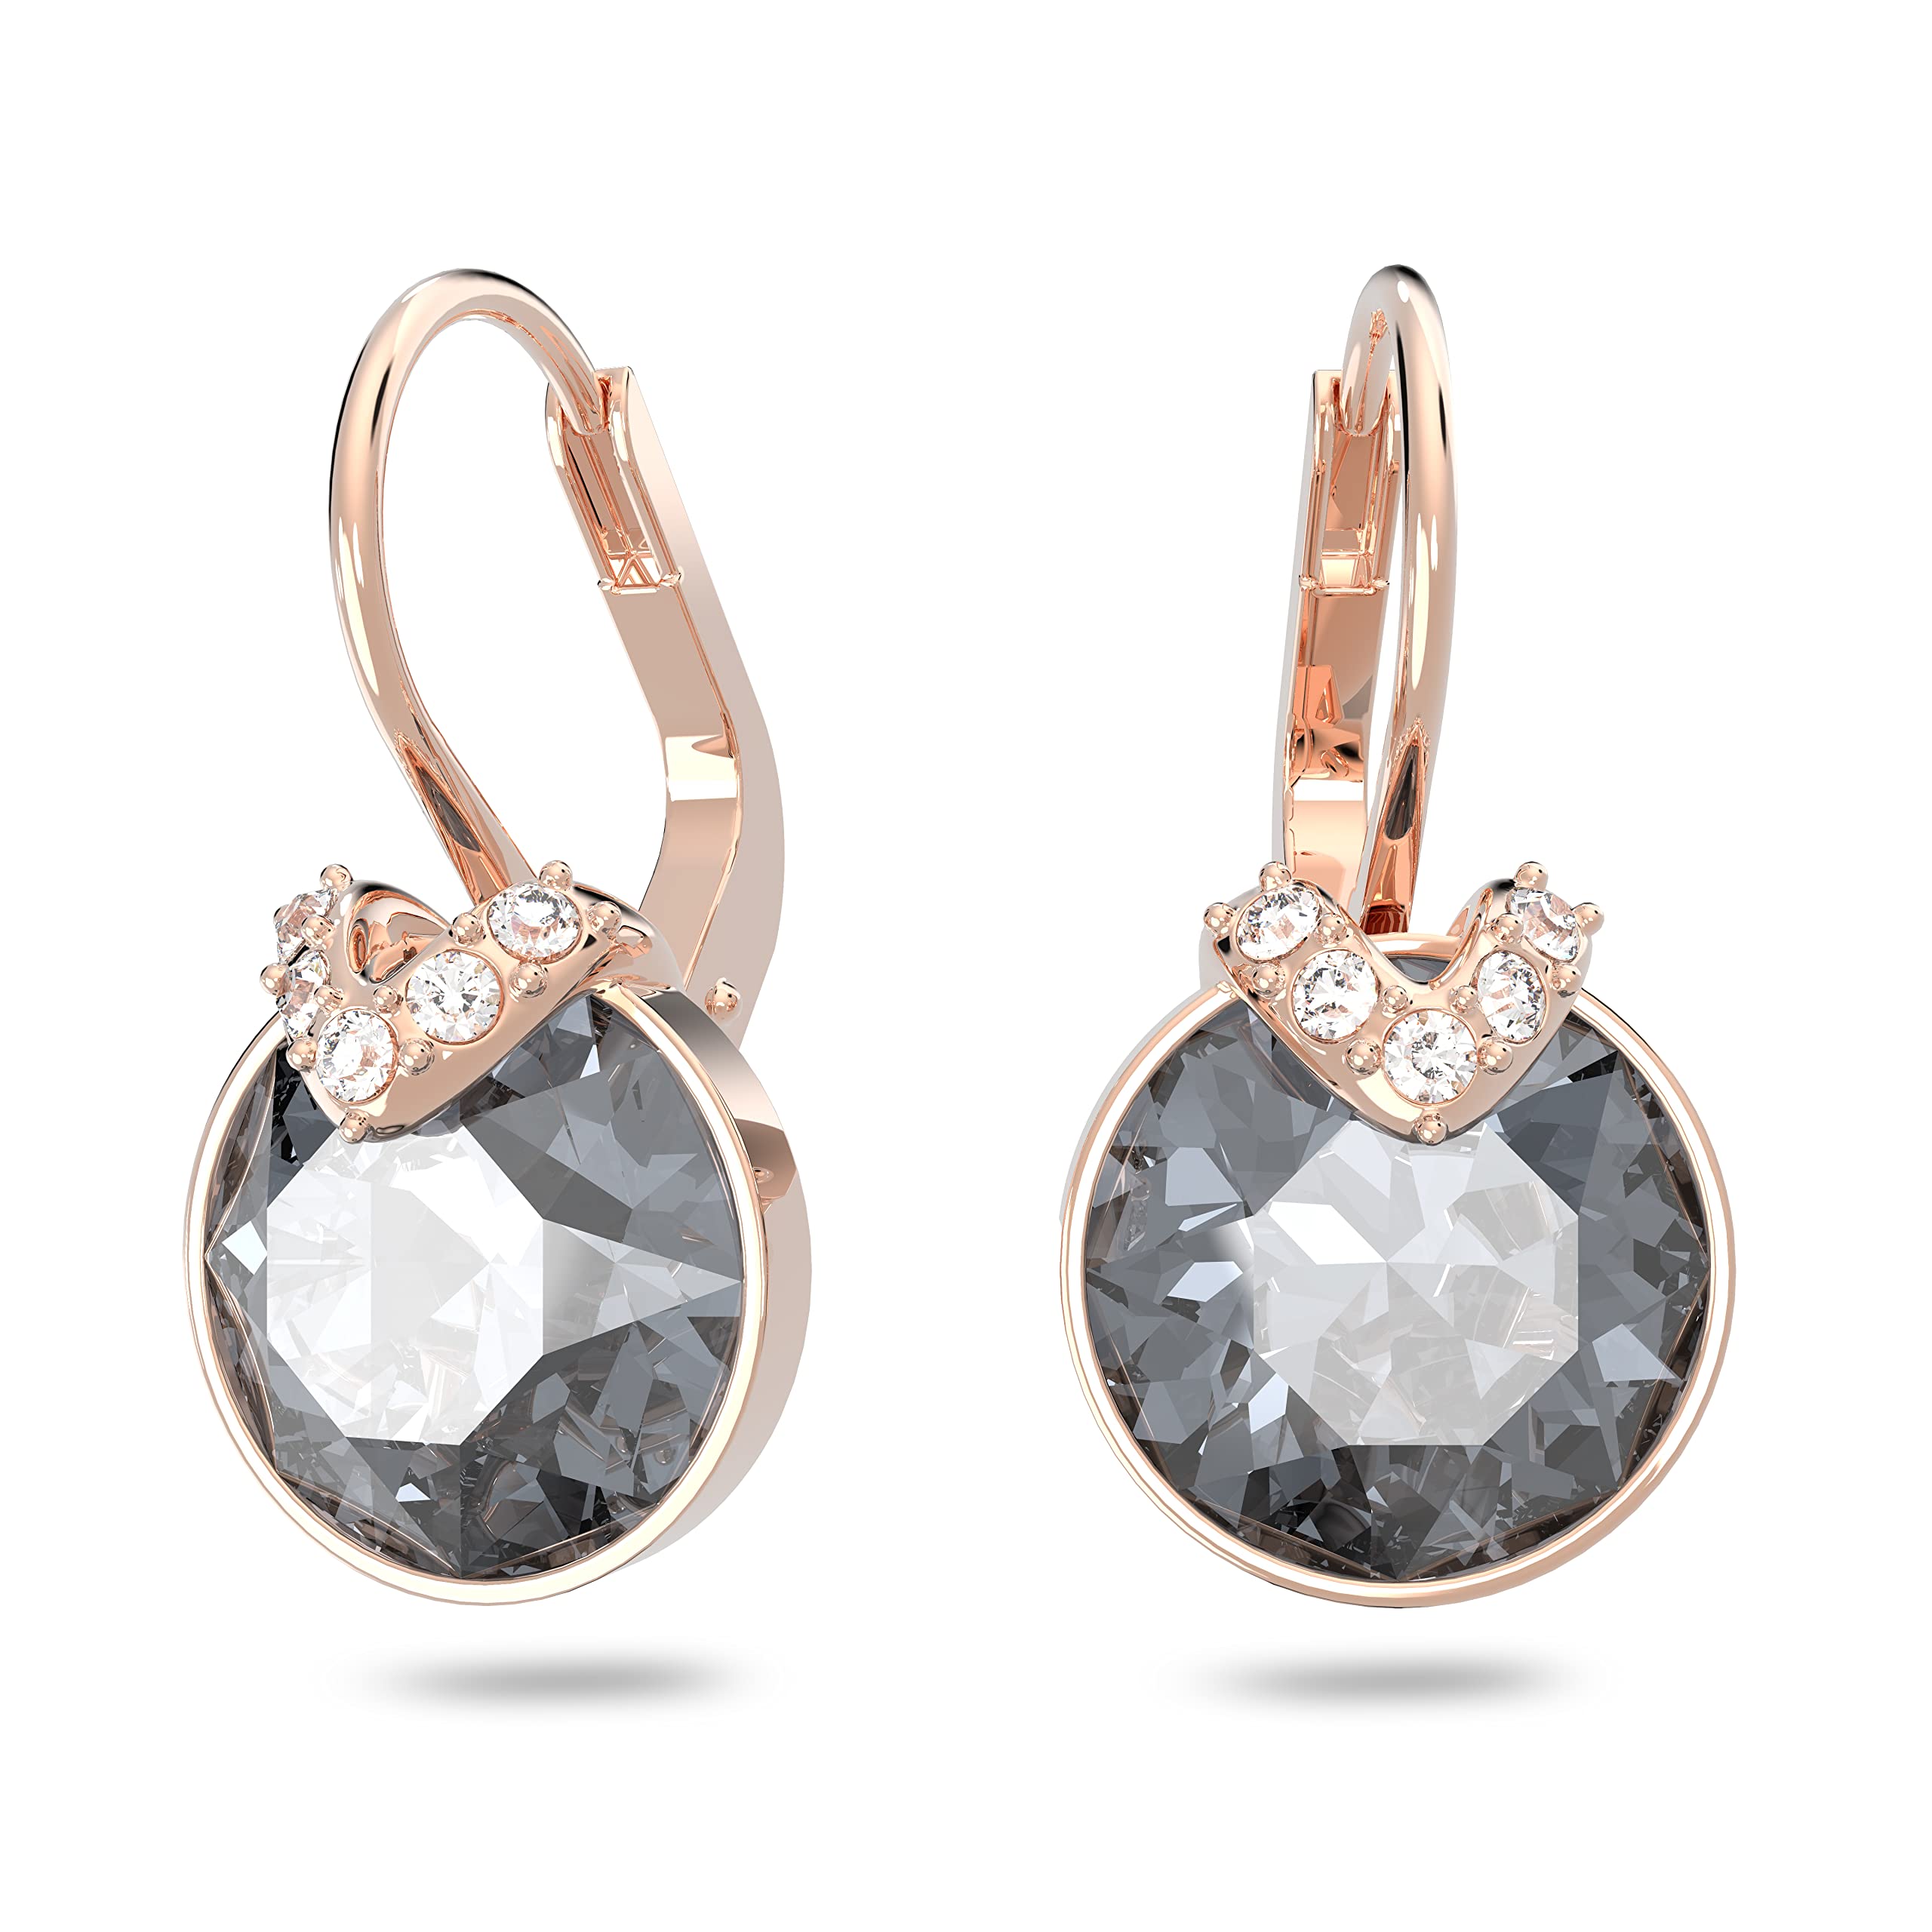 SWAROVSKI Pierced Earrings, gray with V-Shaped crystal PavA Accent on Rose-gold Tone Finish Setting, Part of the Bella collectio